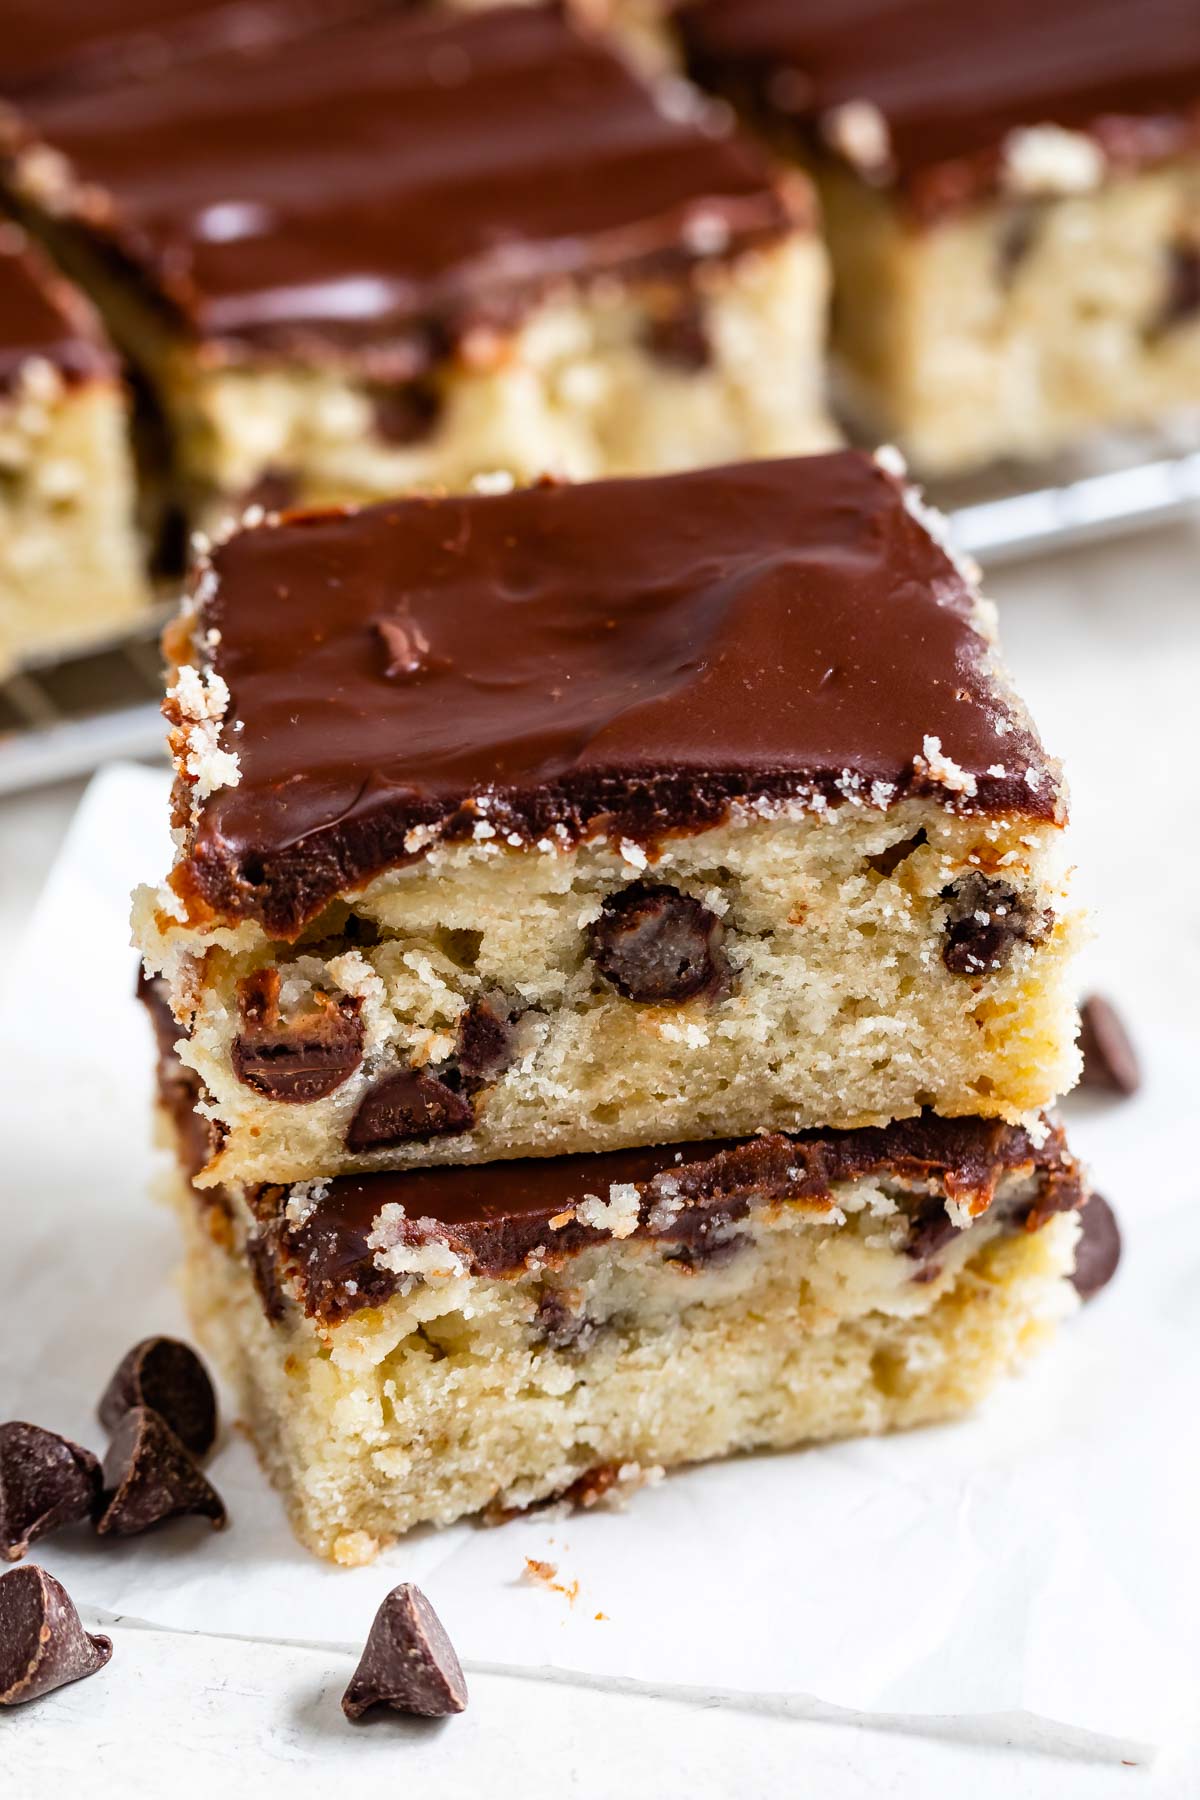 Two easy chocolate chip banana bars with chocolate ganache on top stacked on eachother with more bars in background